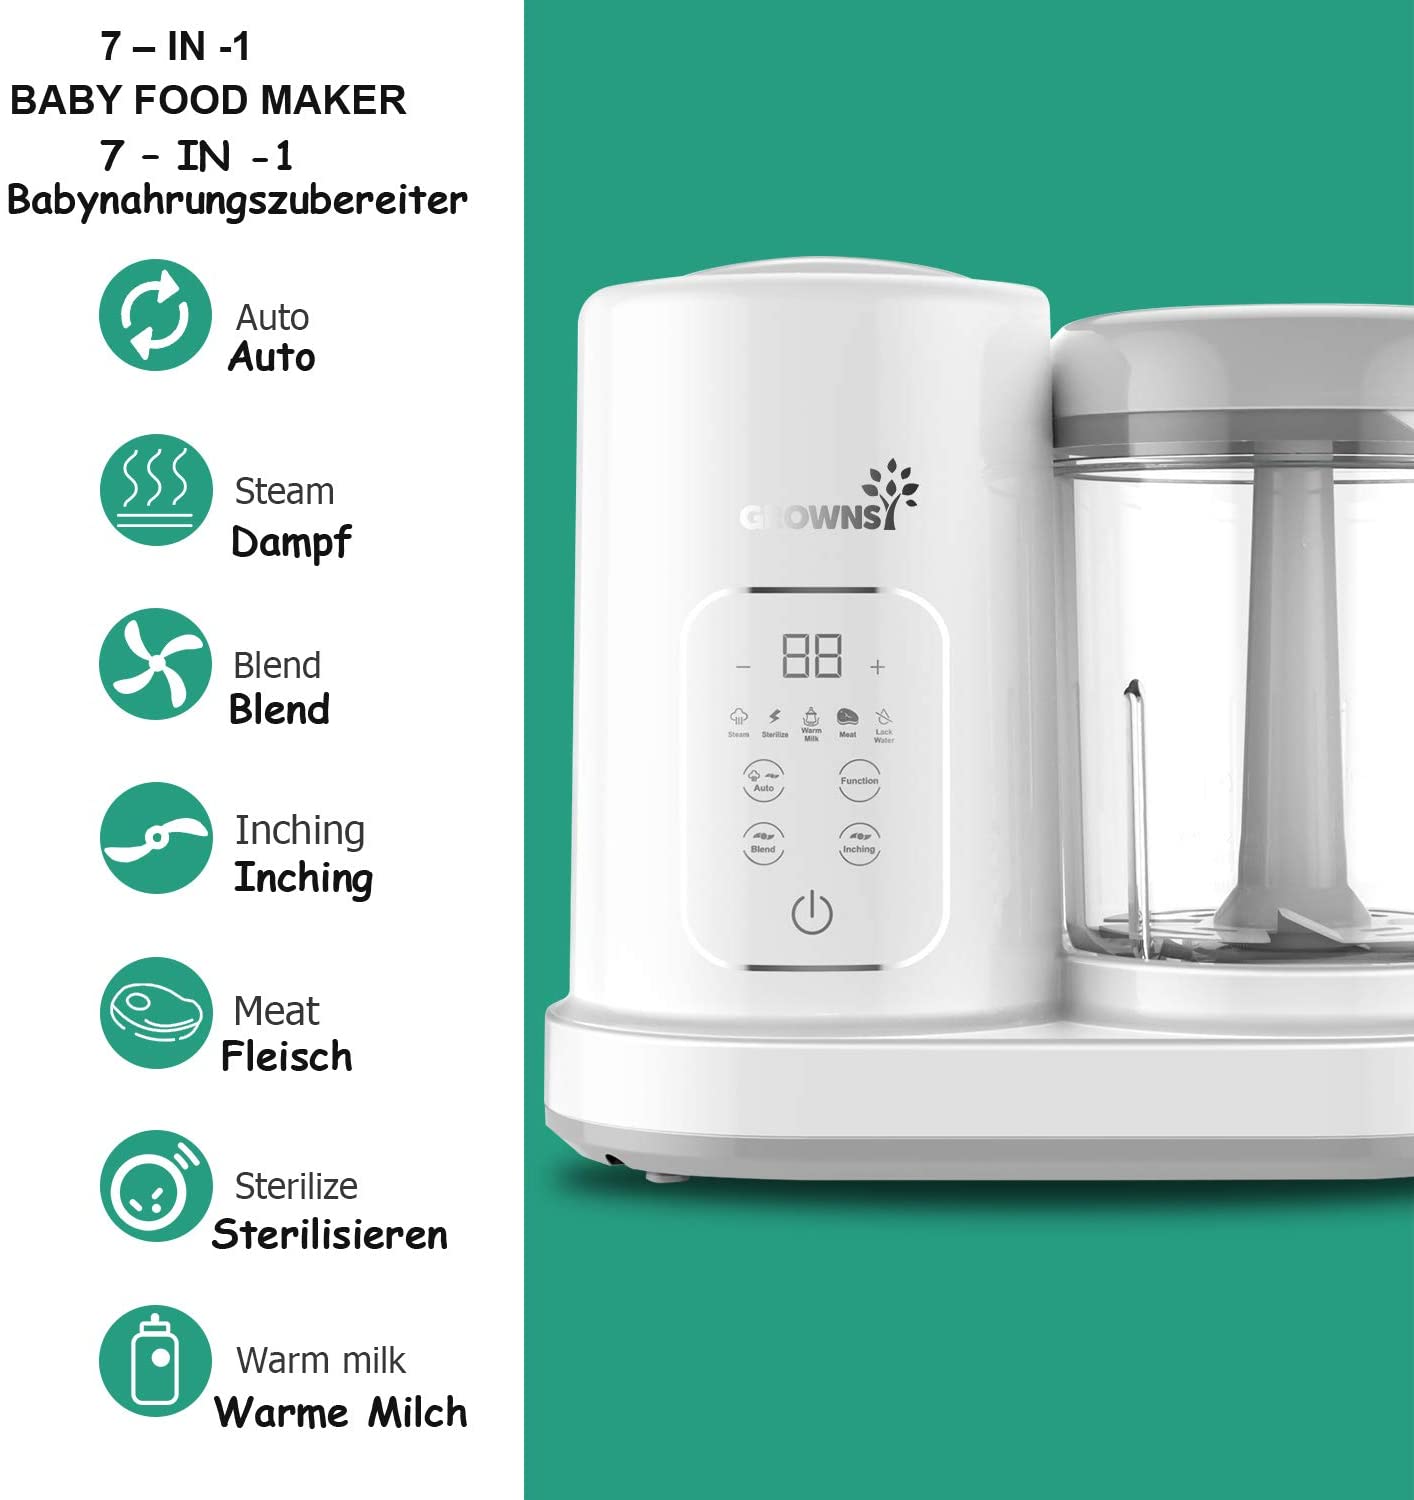 Grownsy 7-in-1 healthy baby food supplement machine is grandly recommended